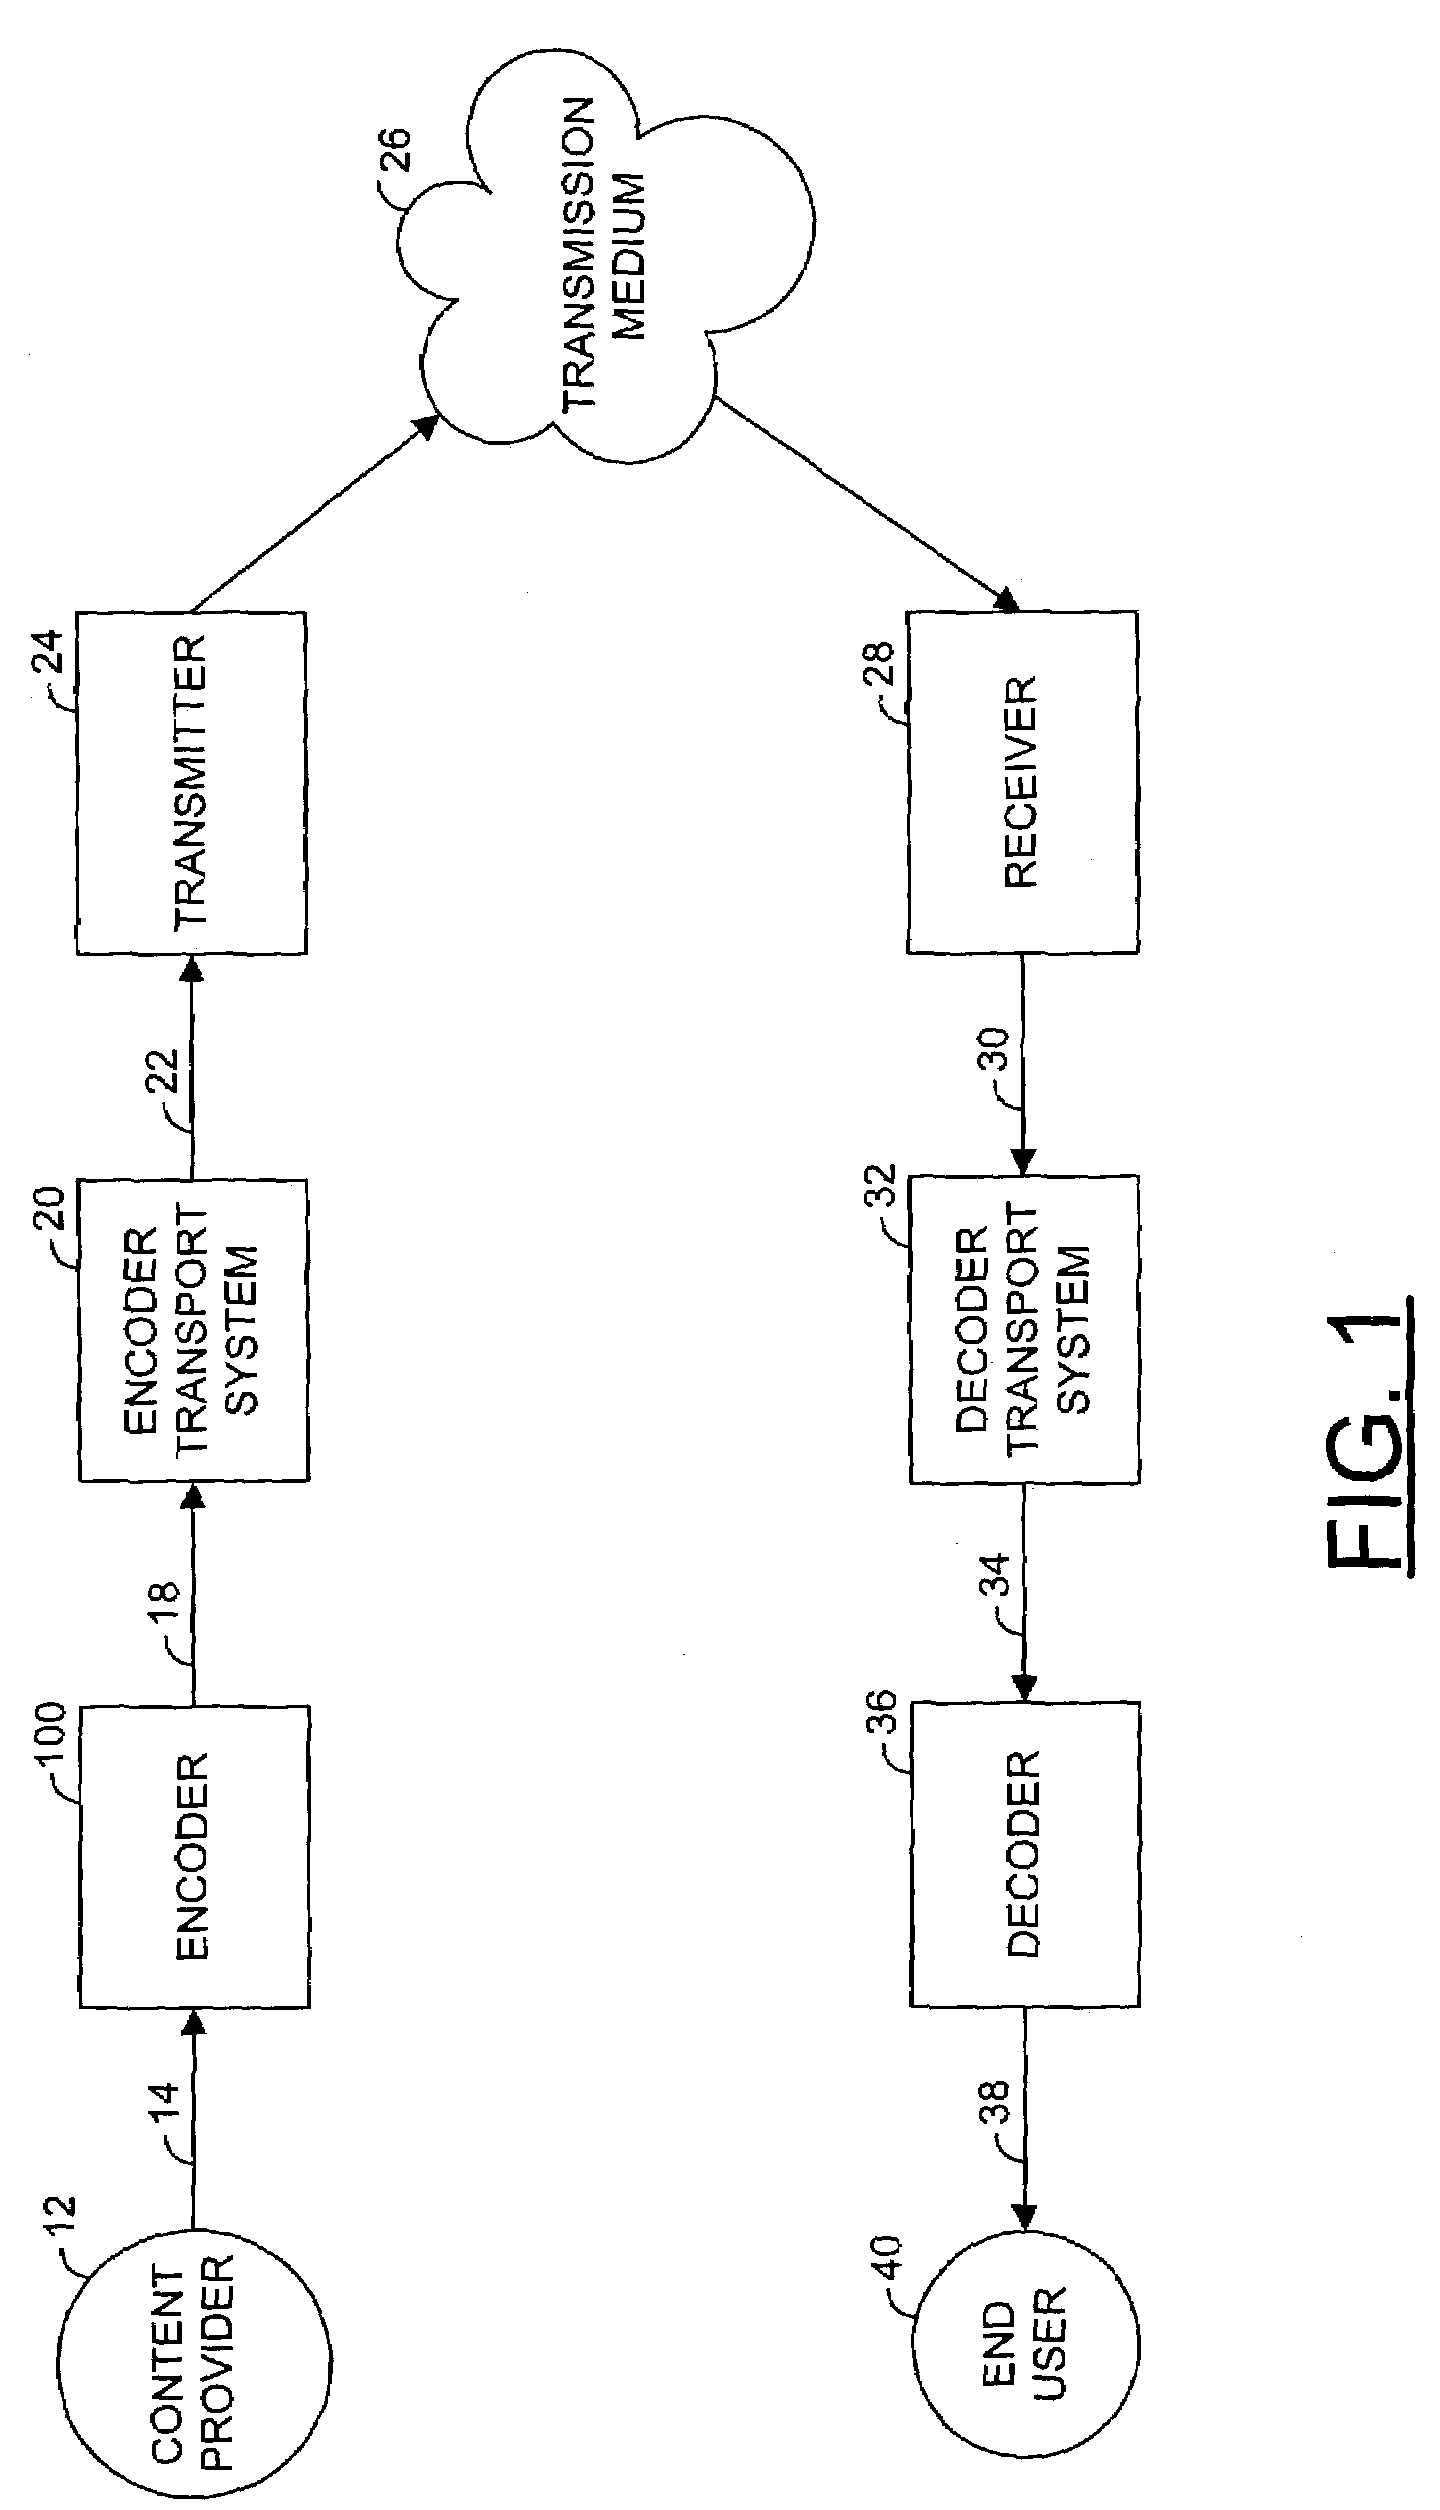 Method for improving rate-distortion performance of a video compression system through parallel coefficient cancellation in the transform